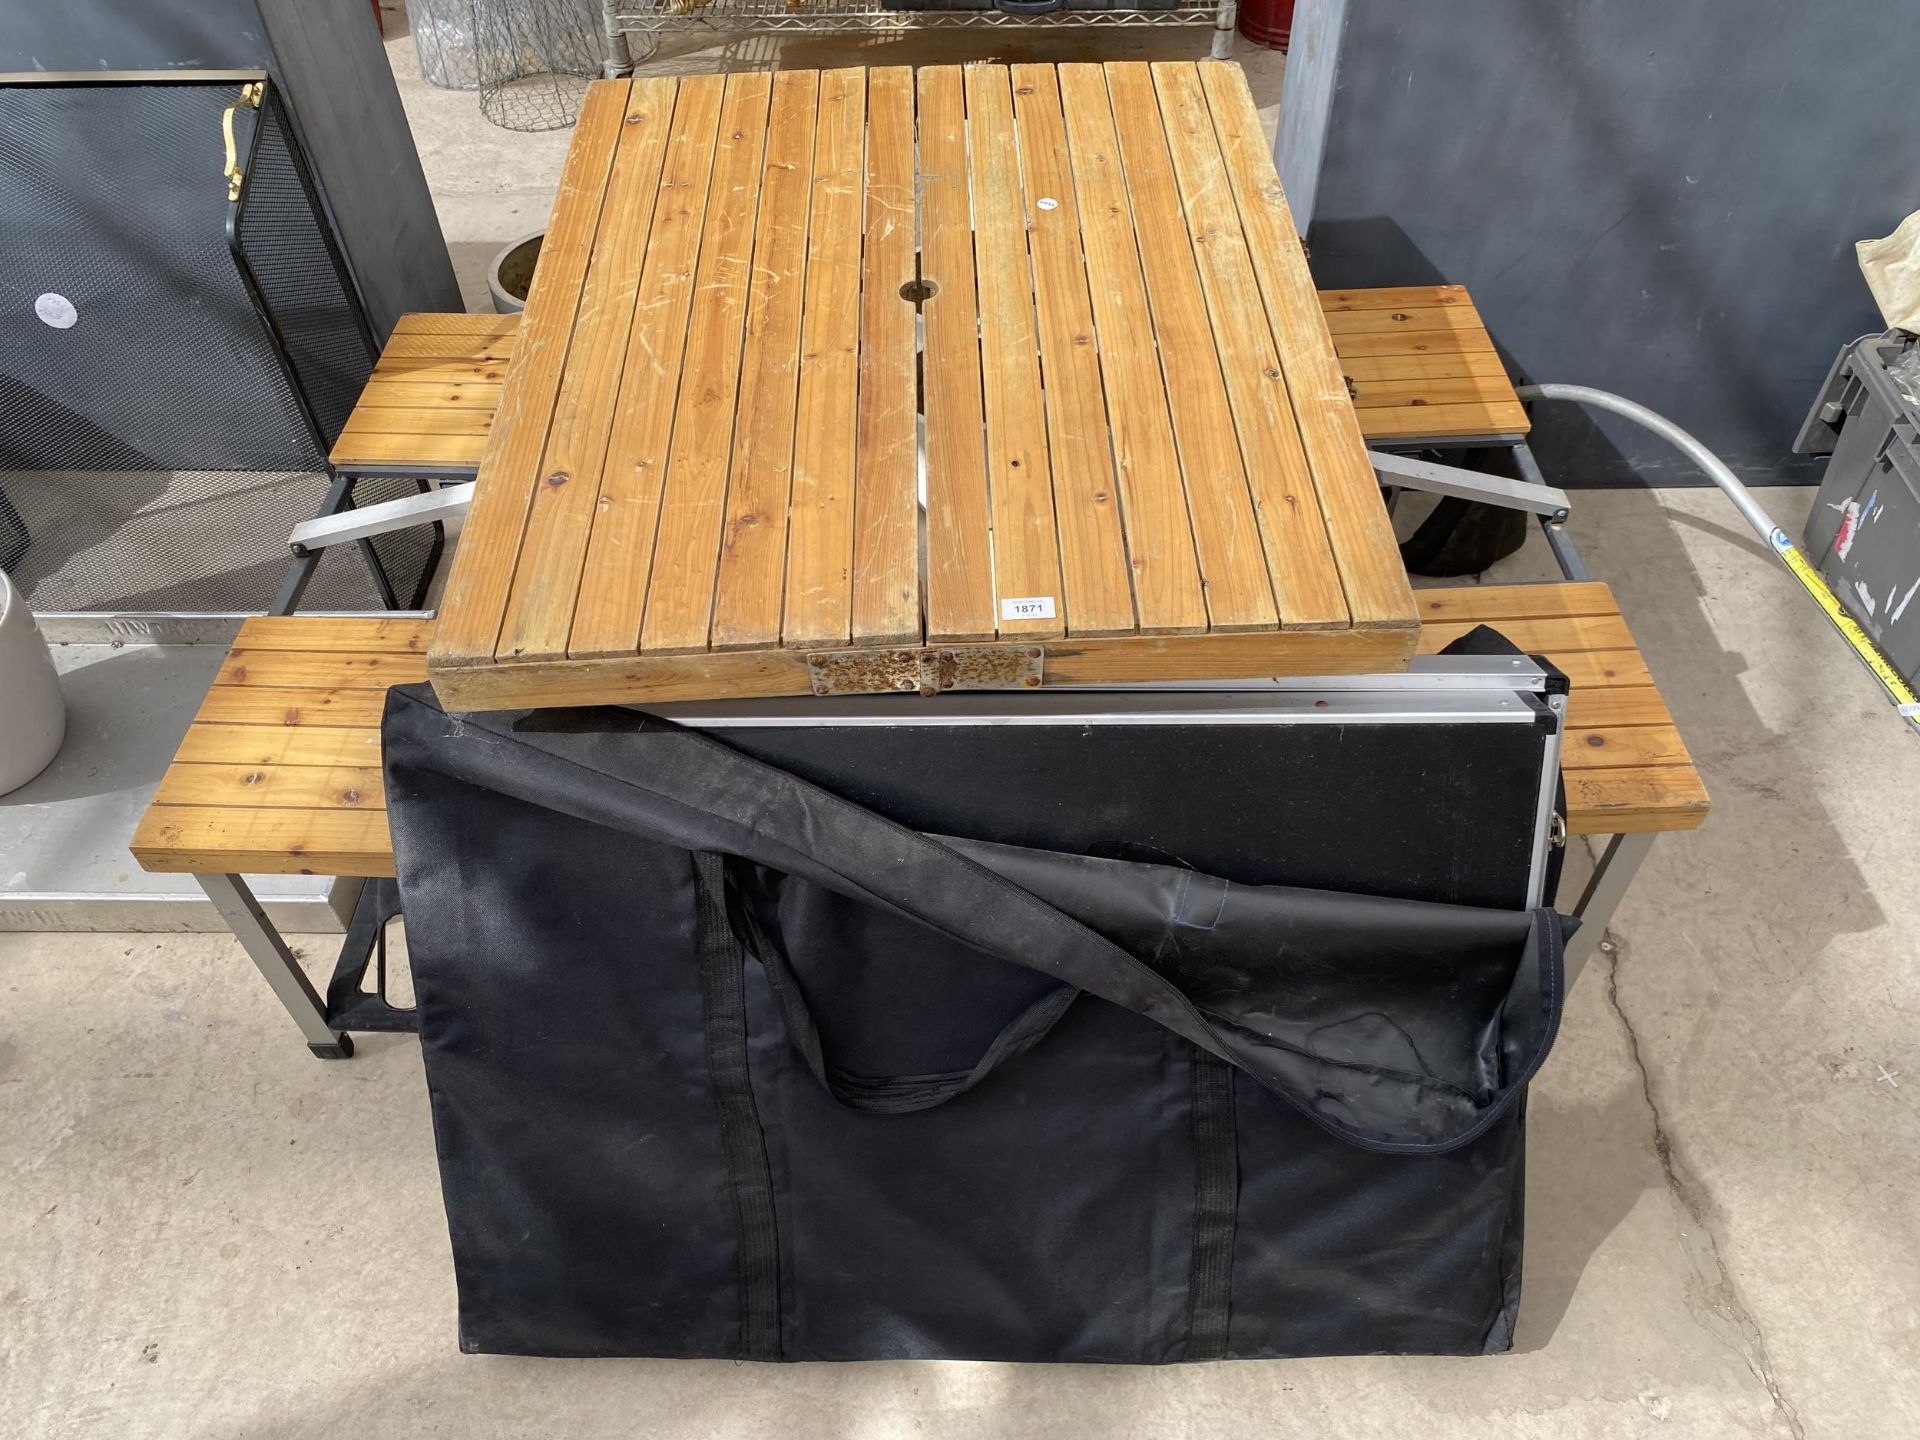 TWO FOLDING PICNIC TABLES